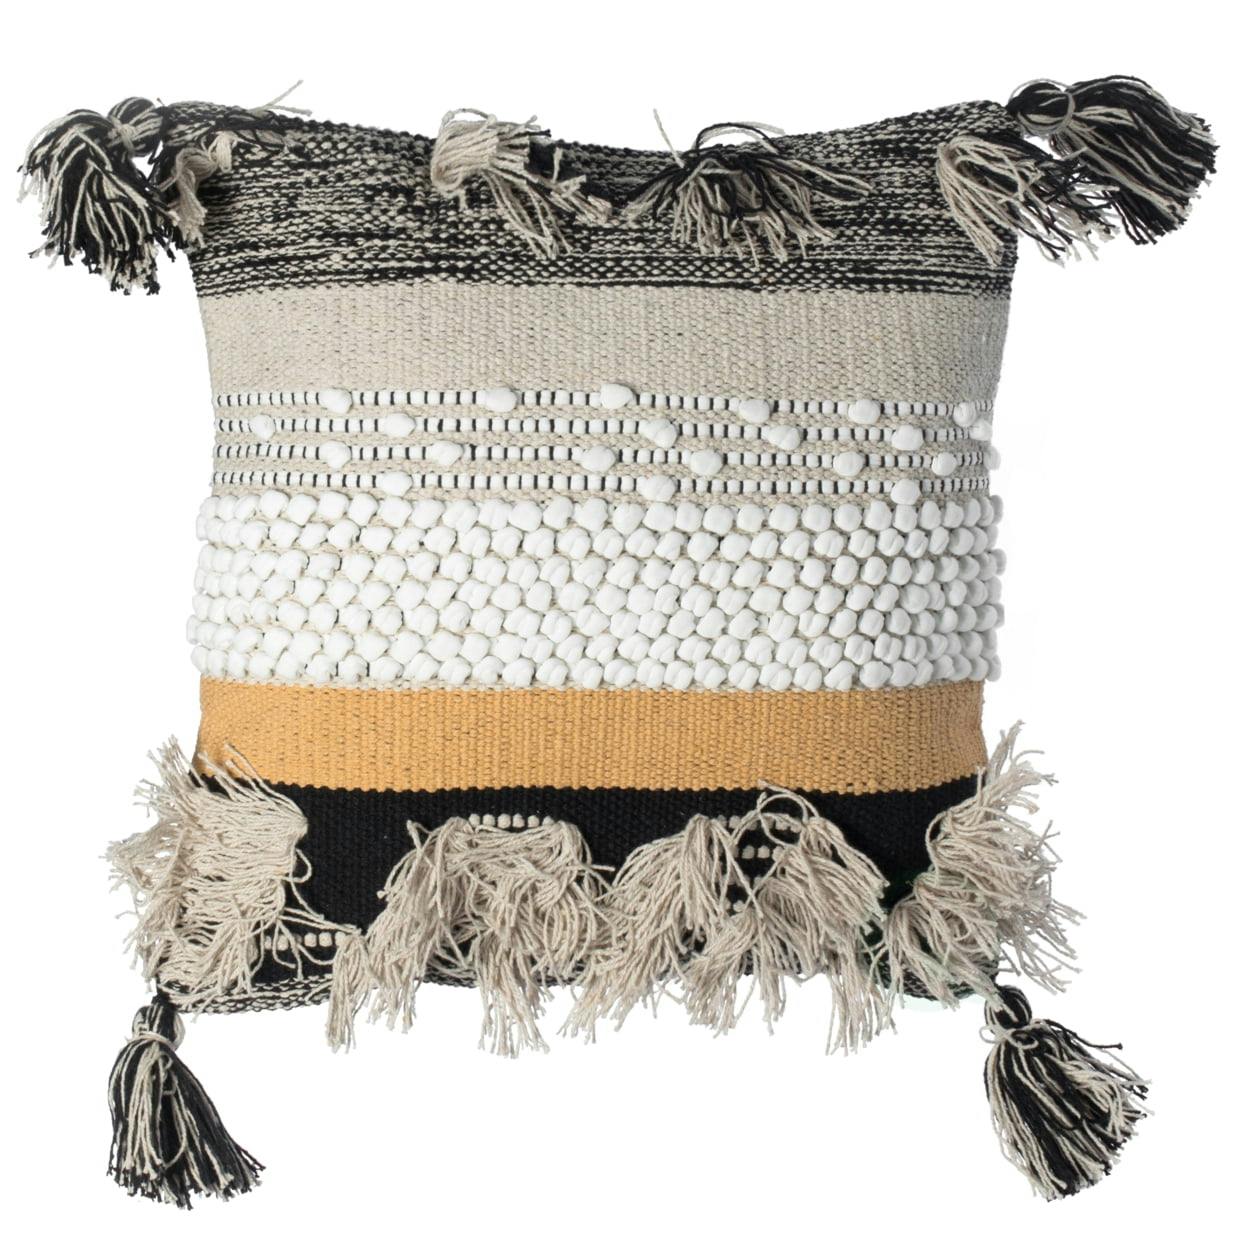 17" Artisan Boho Cotton Square Pillow with Tassels, Beige